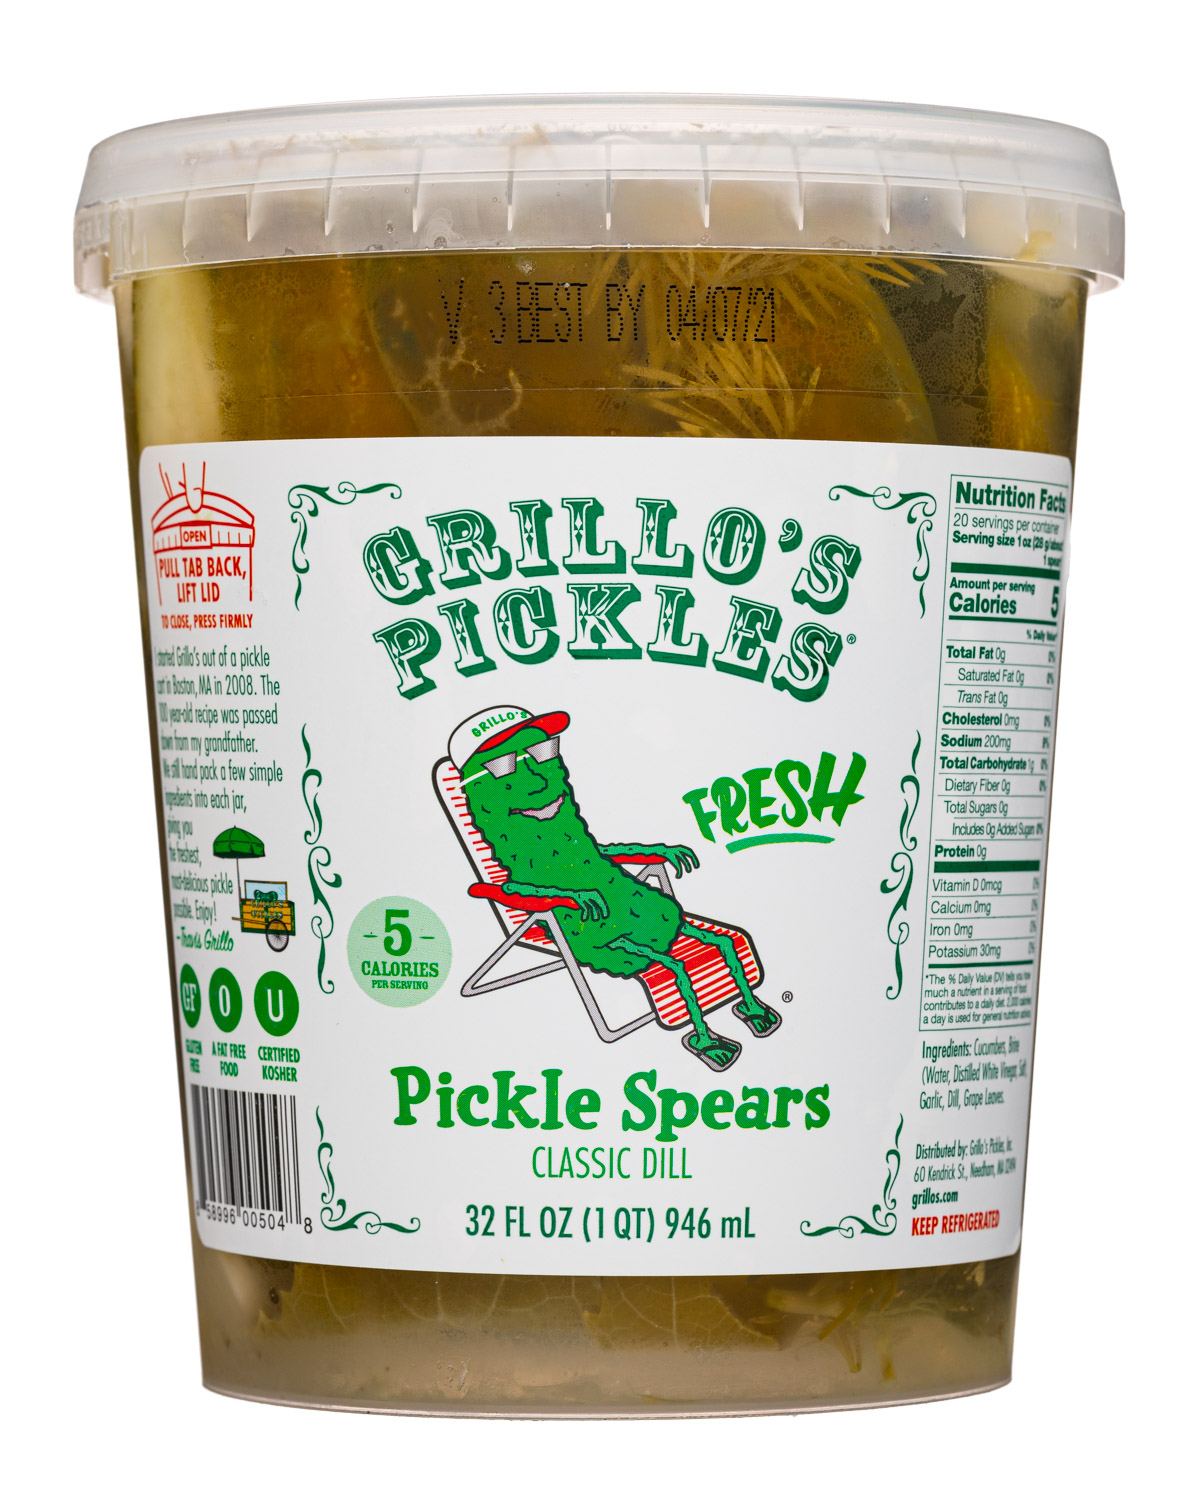 Classic Dill Pickle Spears 32oz